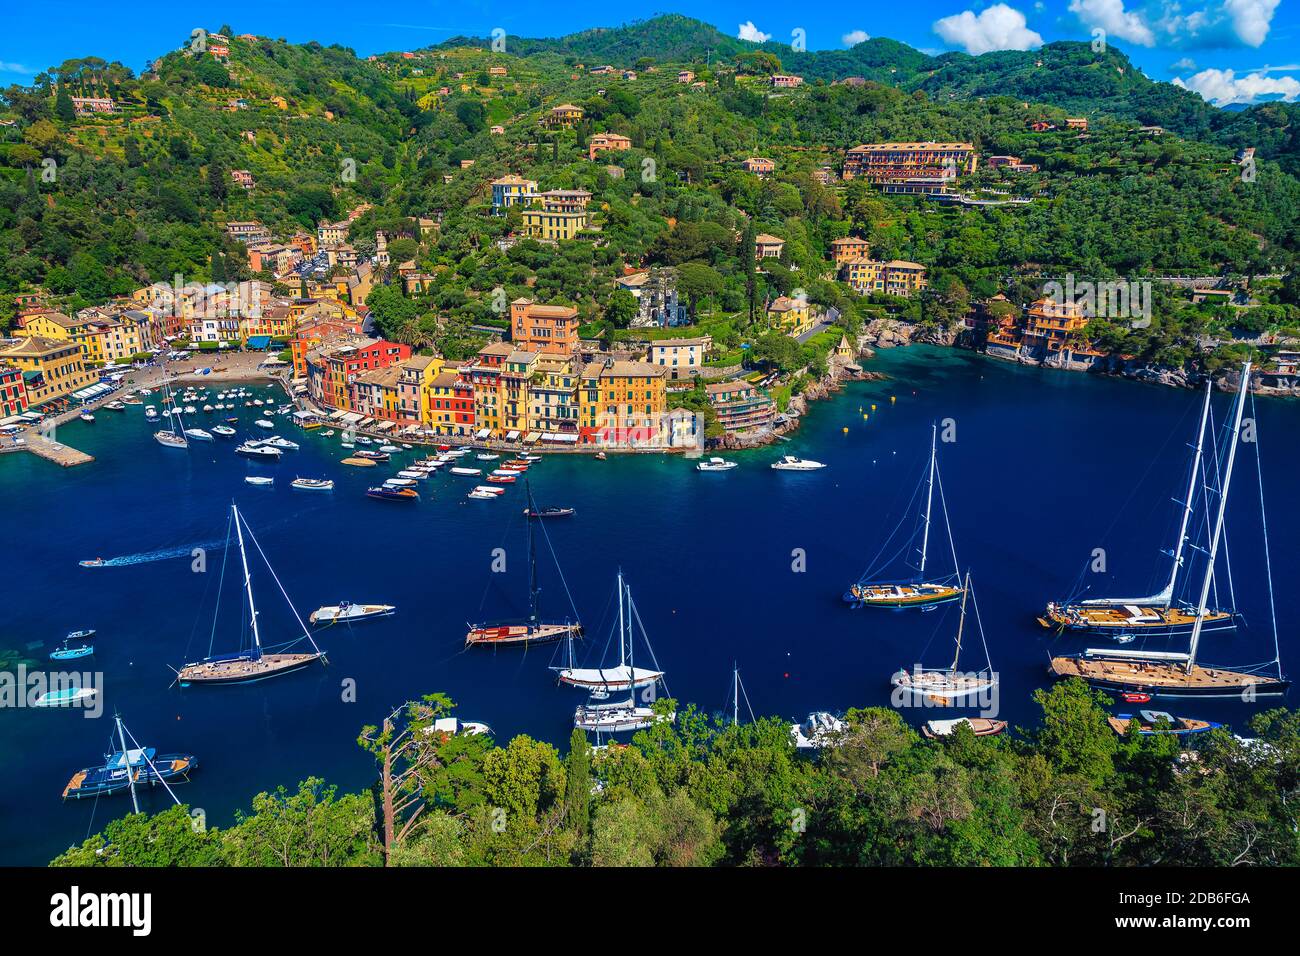 Great travel and summer vacation destination. Picturesque resort with stunning buildings and luxury boats, yachts in the harbor, Portofino, Liguria, I Stock Photo